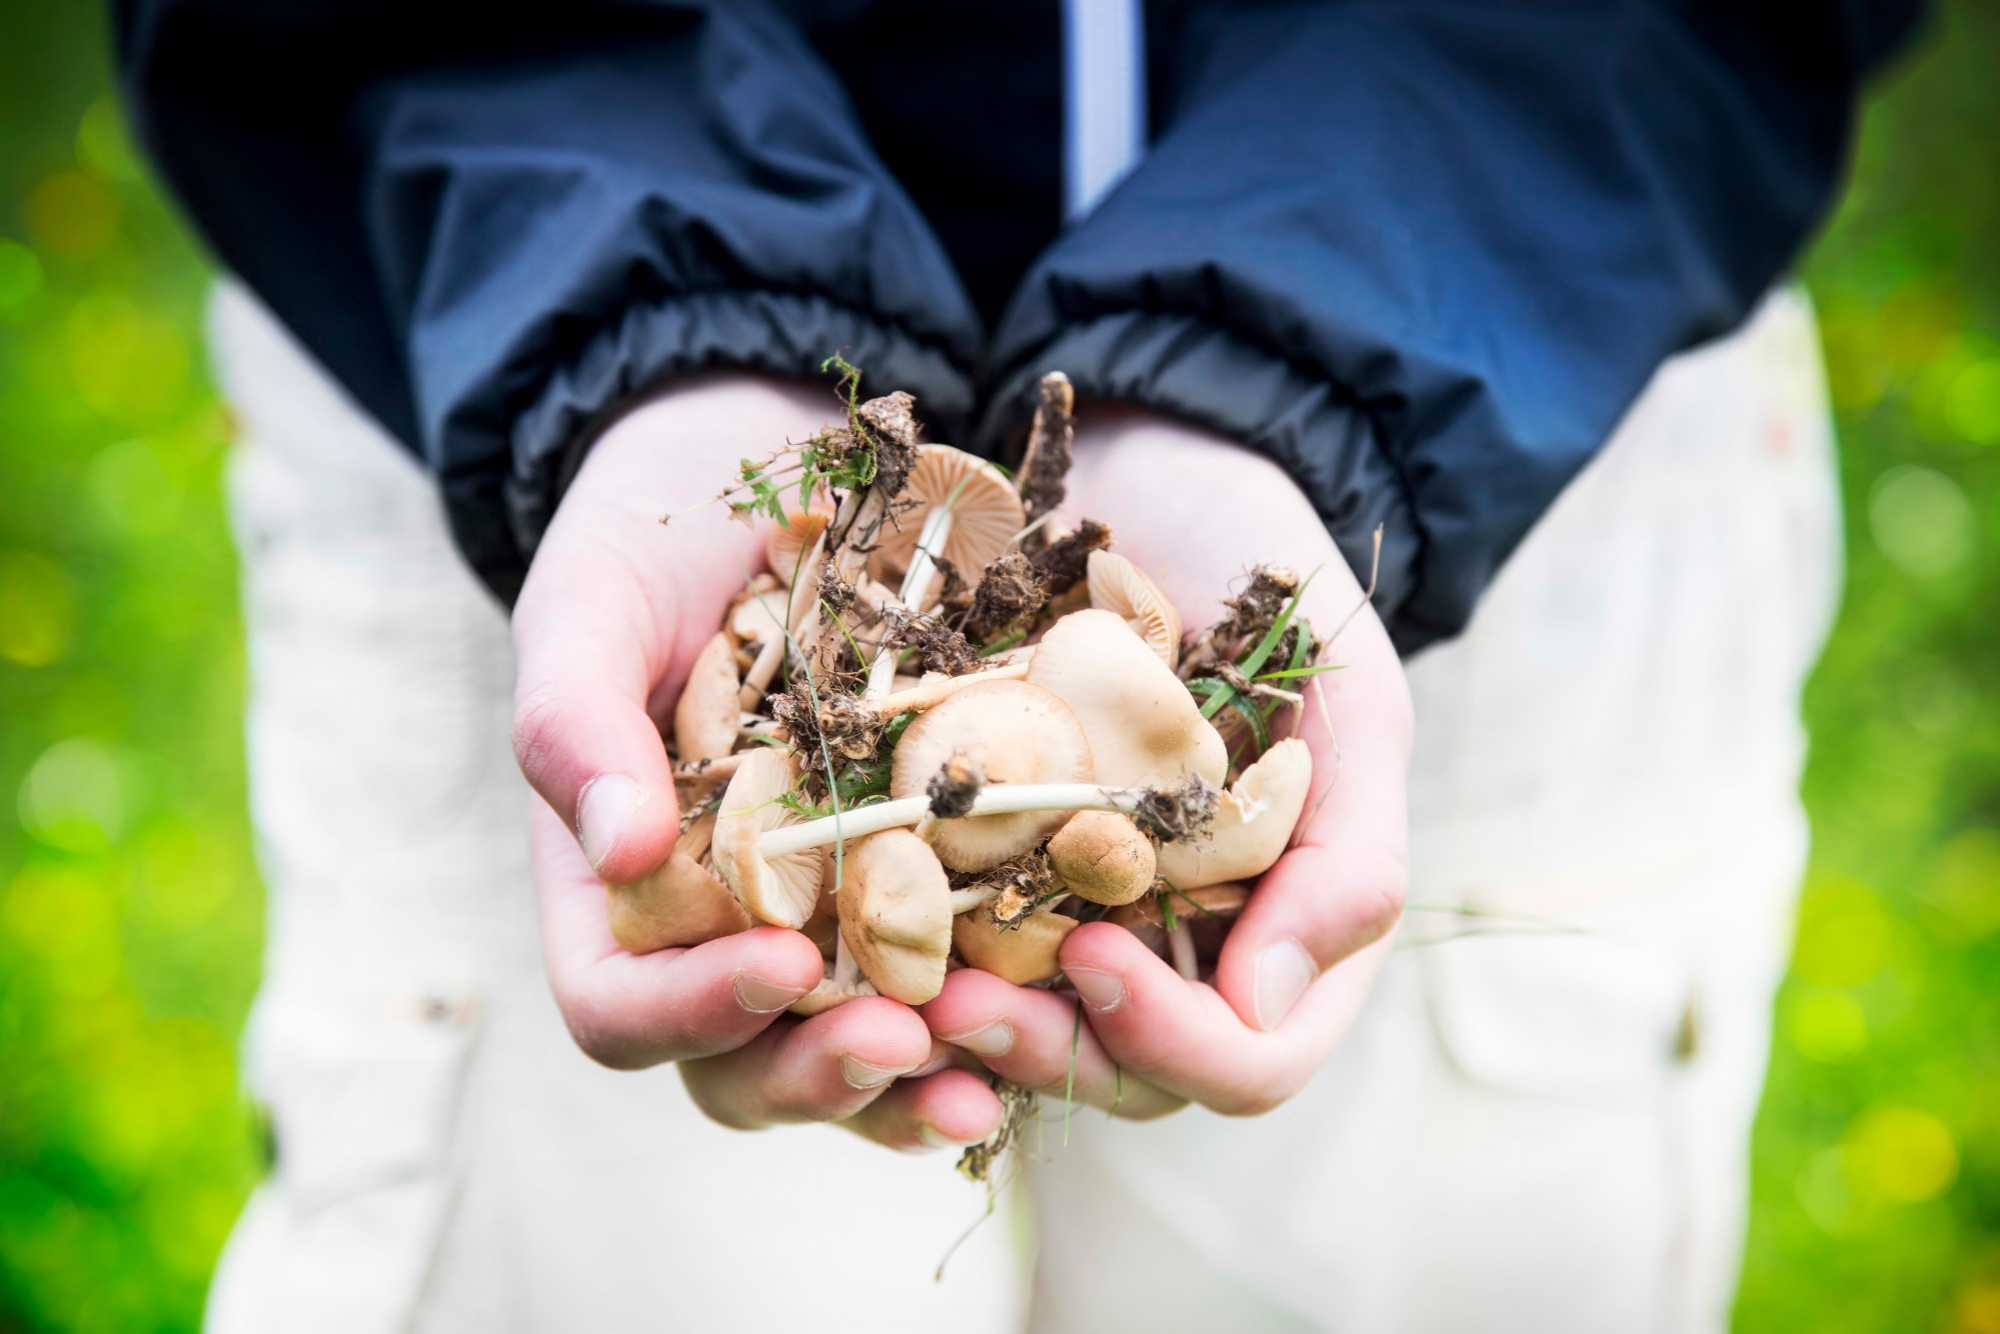 A child showing off foraged mushrooms.